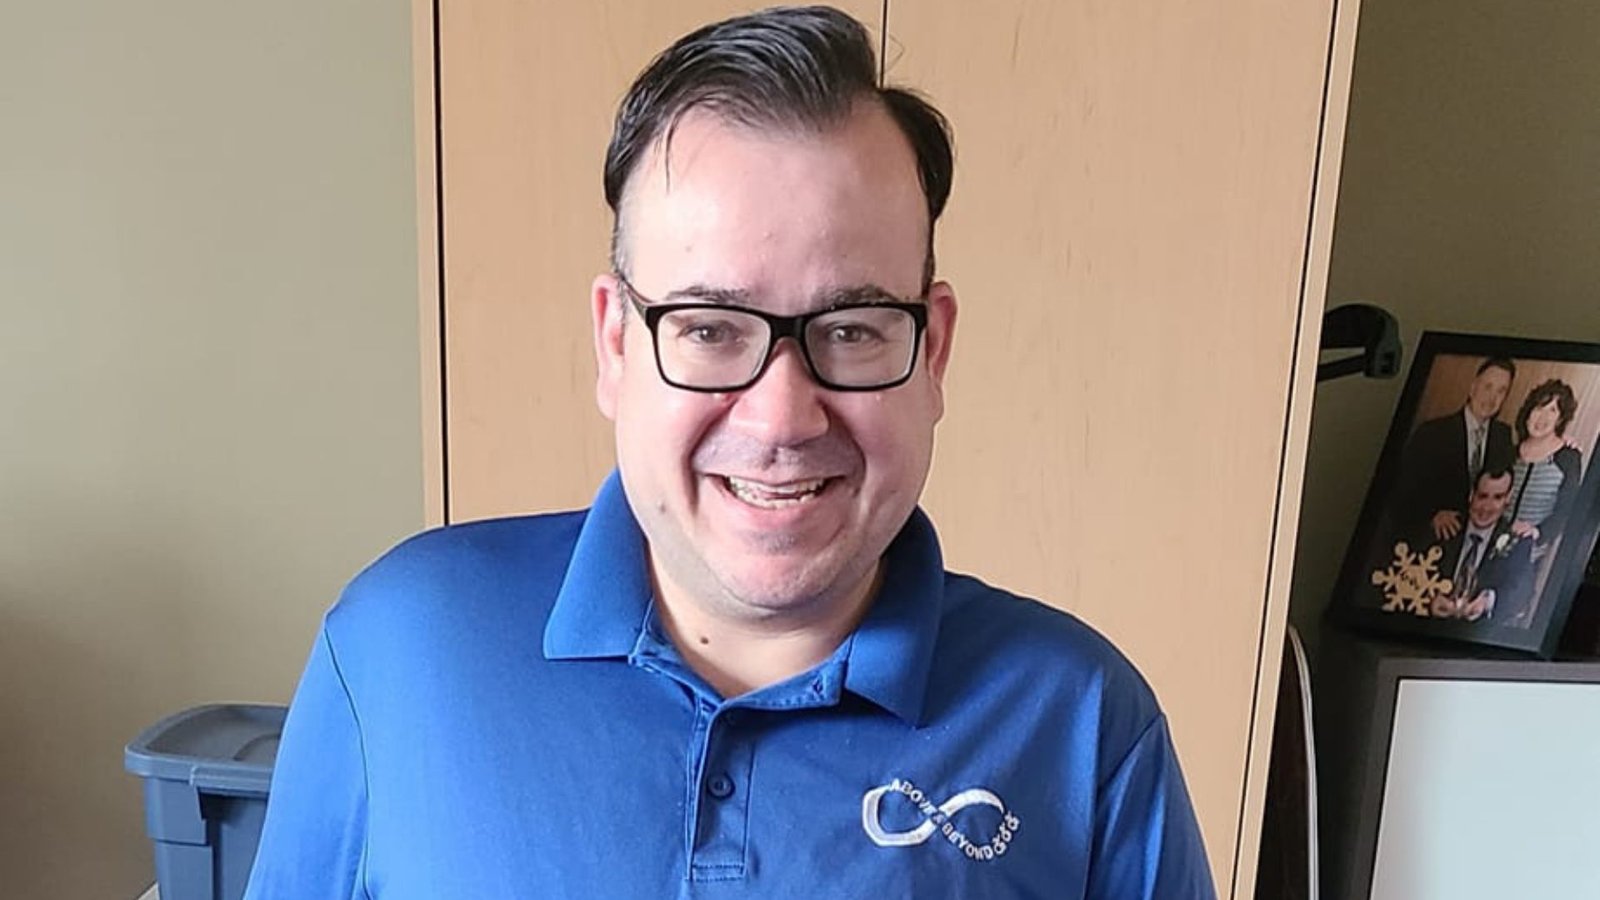 Anthony smiling wearing a blue shirt and glasses in his wheelchair.